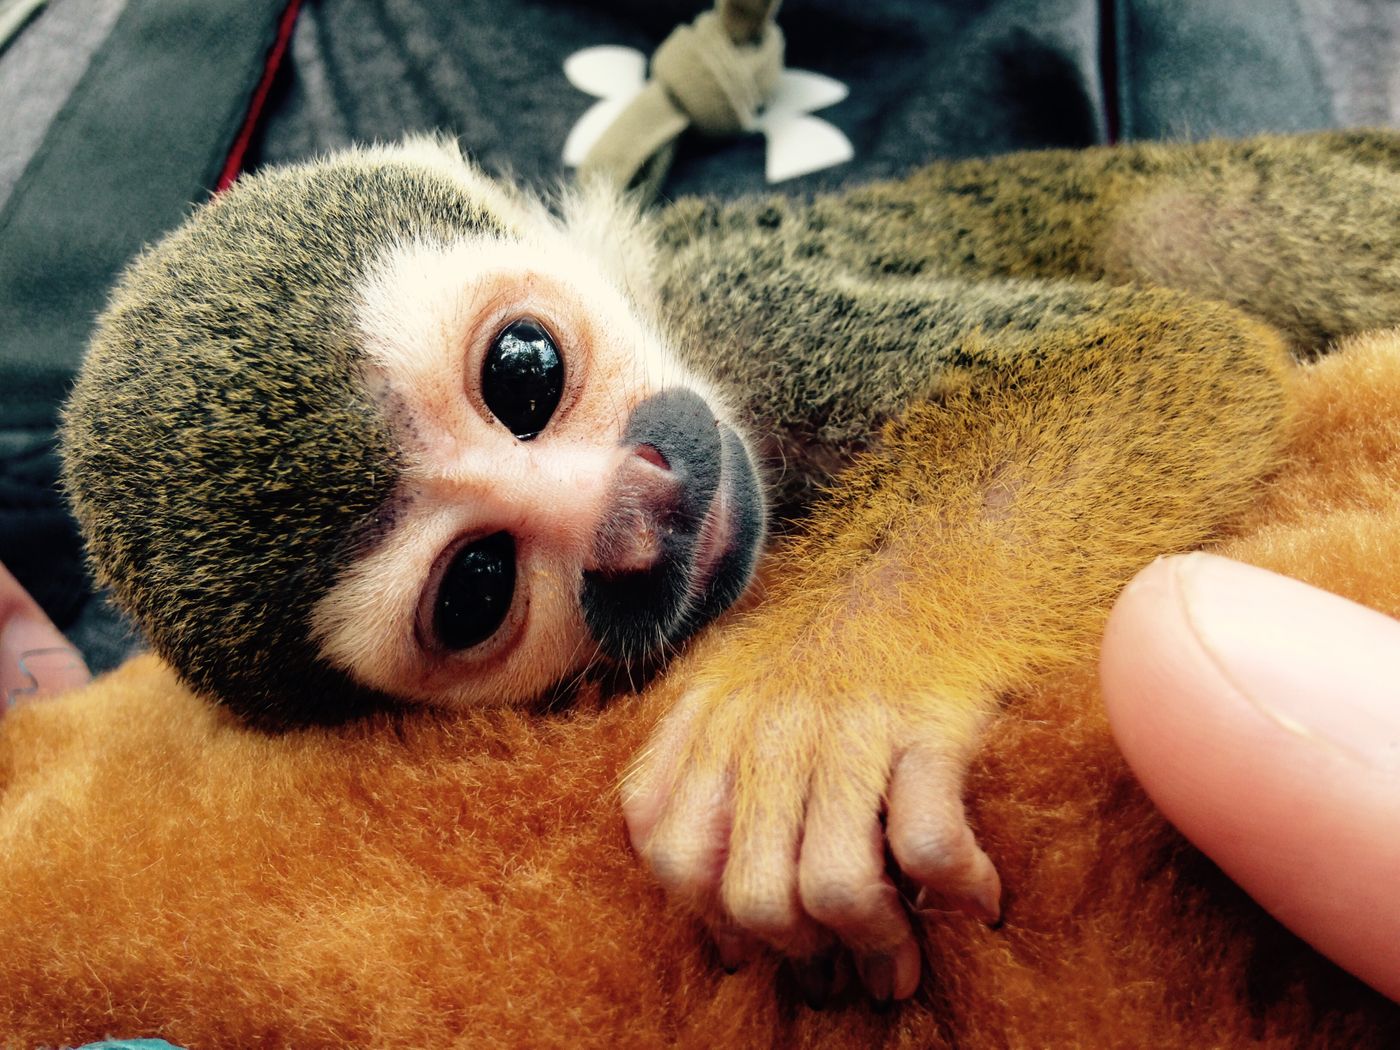 A close up of the Spider monkey, Robbie, only two weeks old here